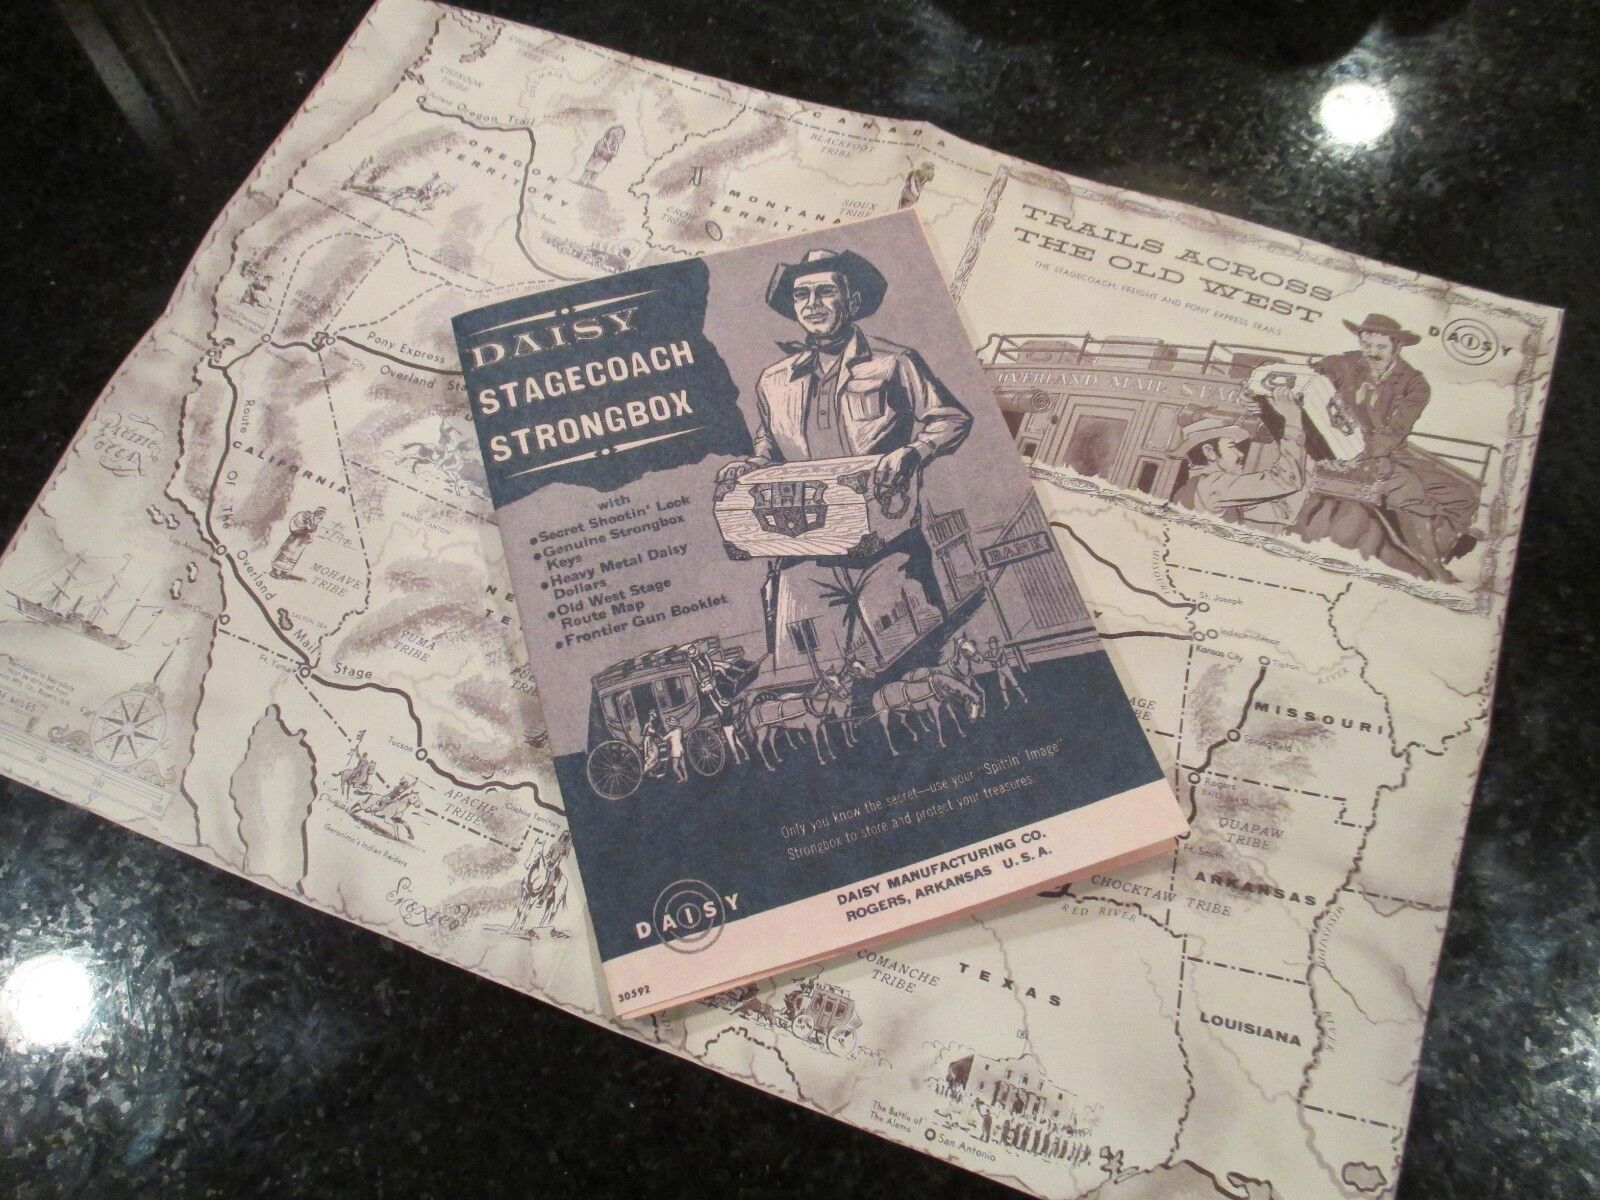 Daisy BB Stagecoach Strongbox Cap Gun Instruction Manual and Map - Reproduction